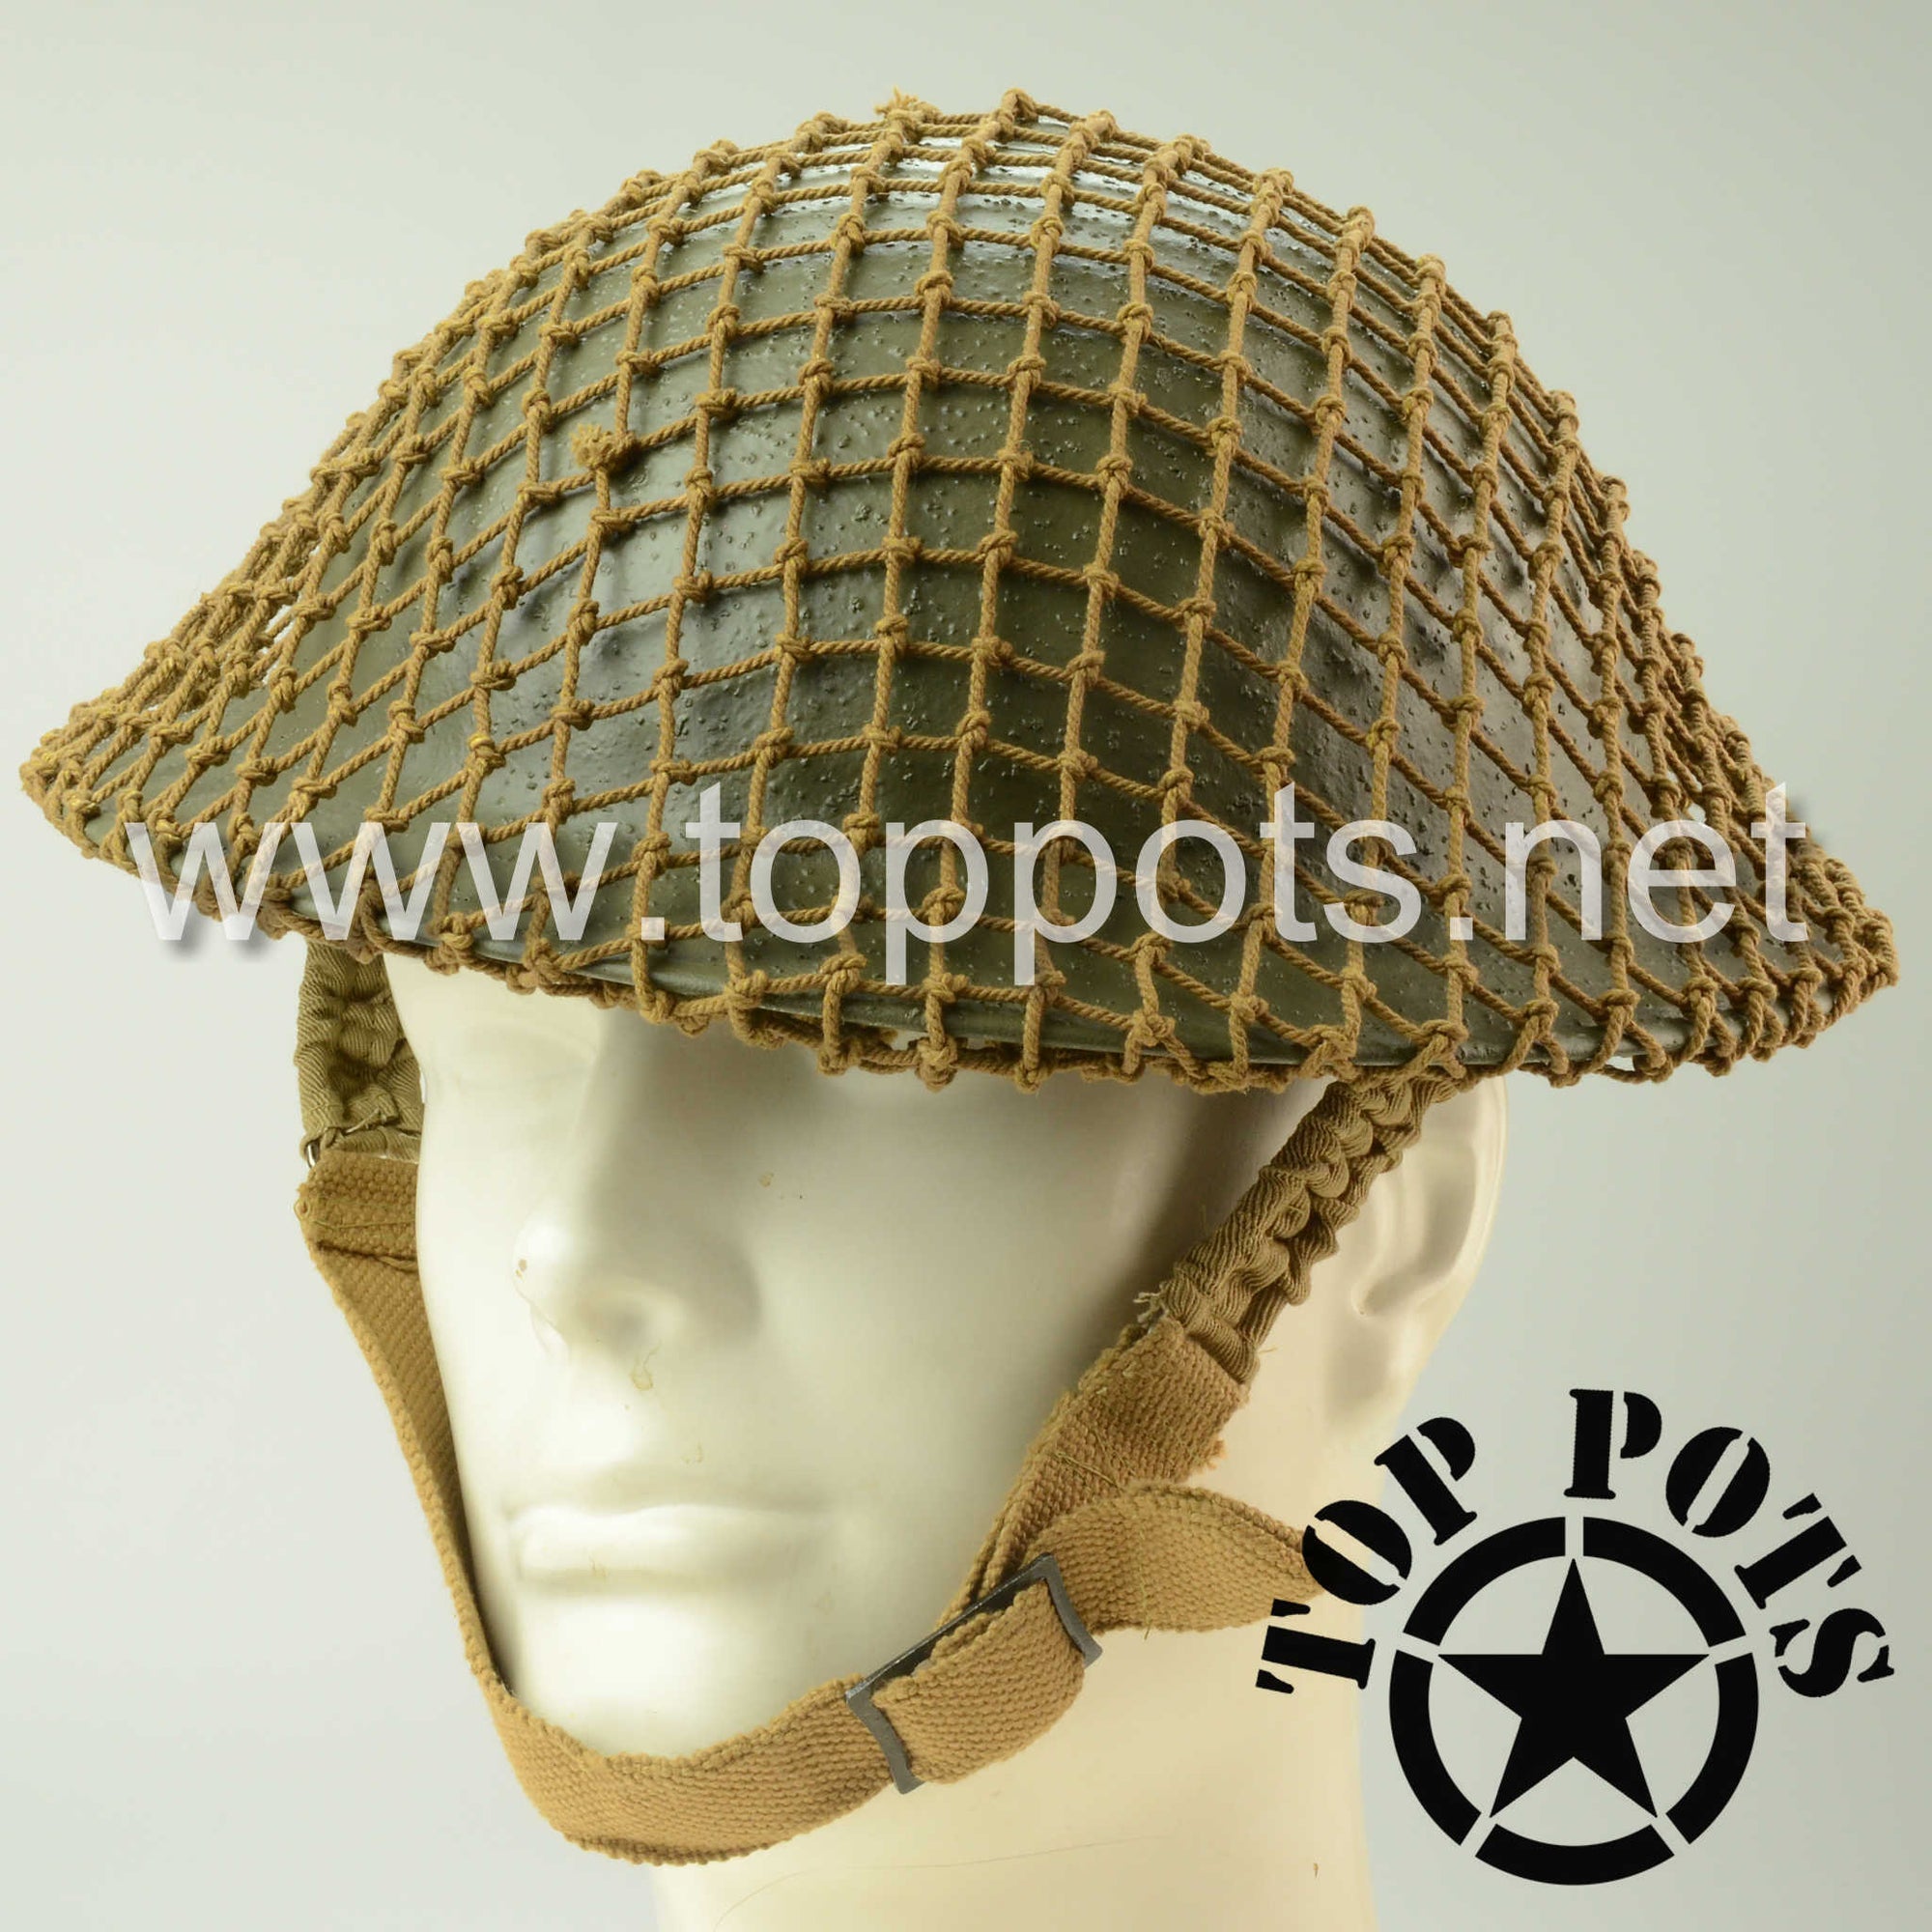 WWII British Army Reproduction MKII MK2 Enlisted Brodie Helmet with Reproduction Helmet Net – Field Textured Finish